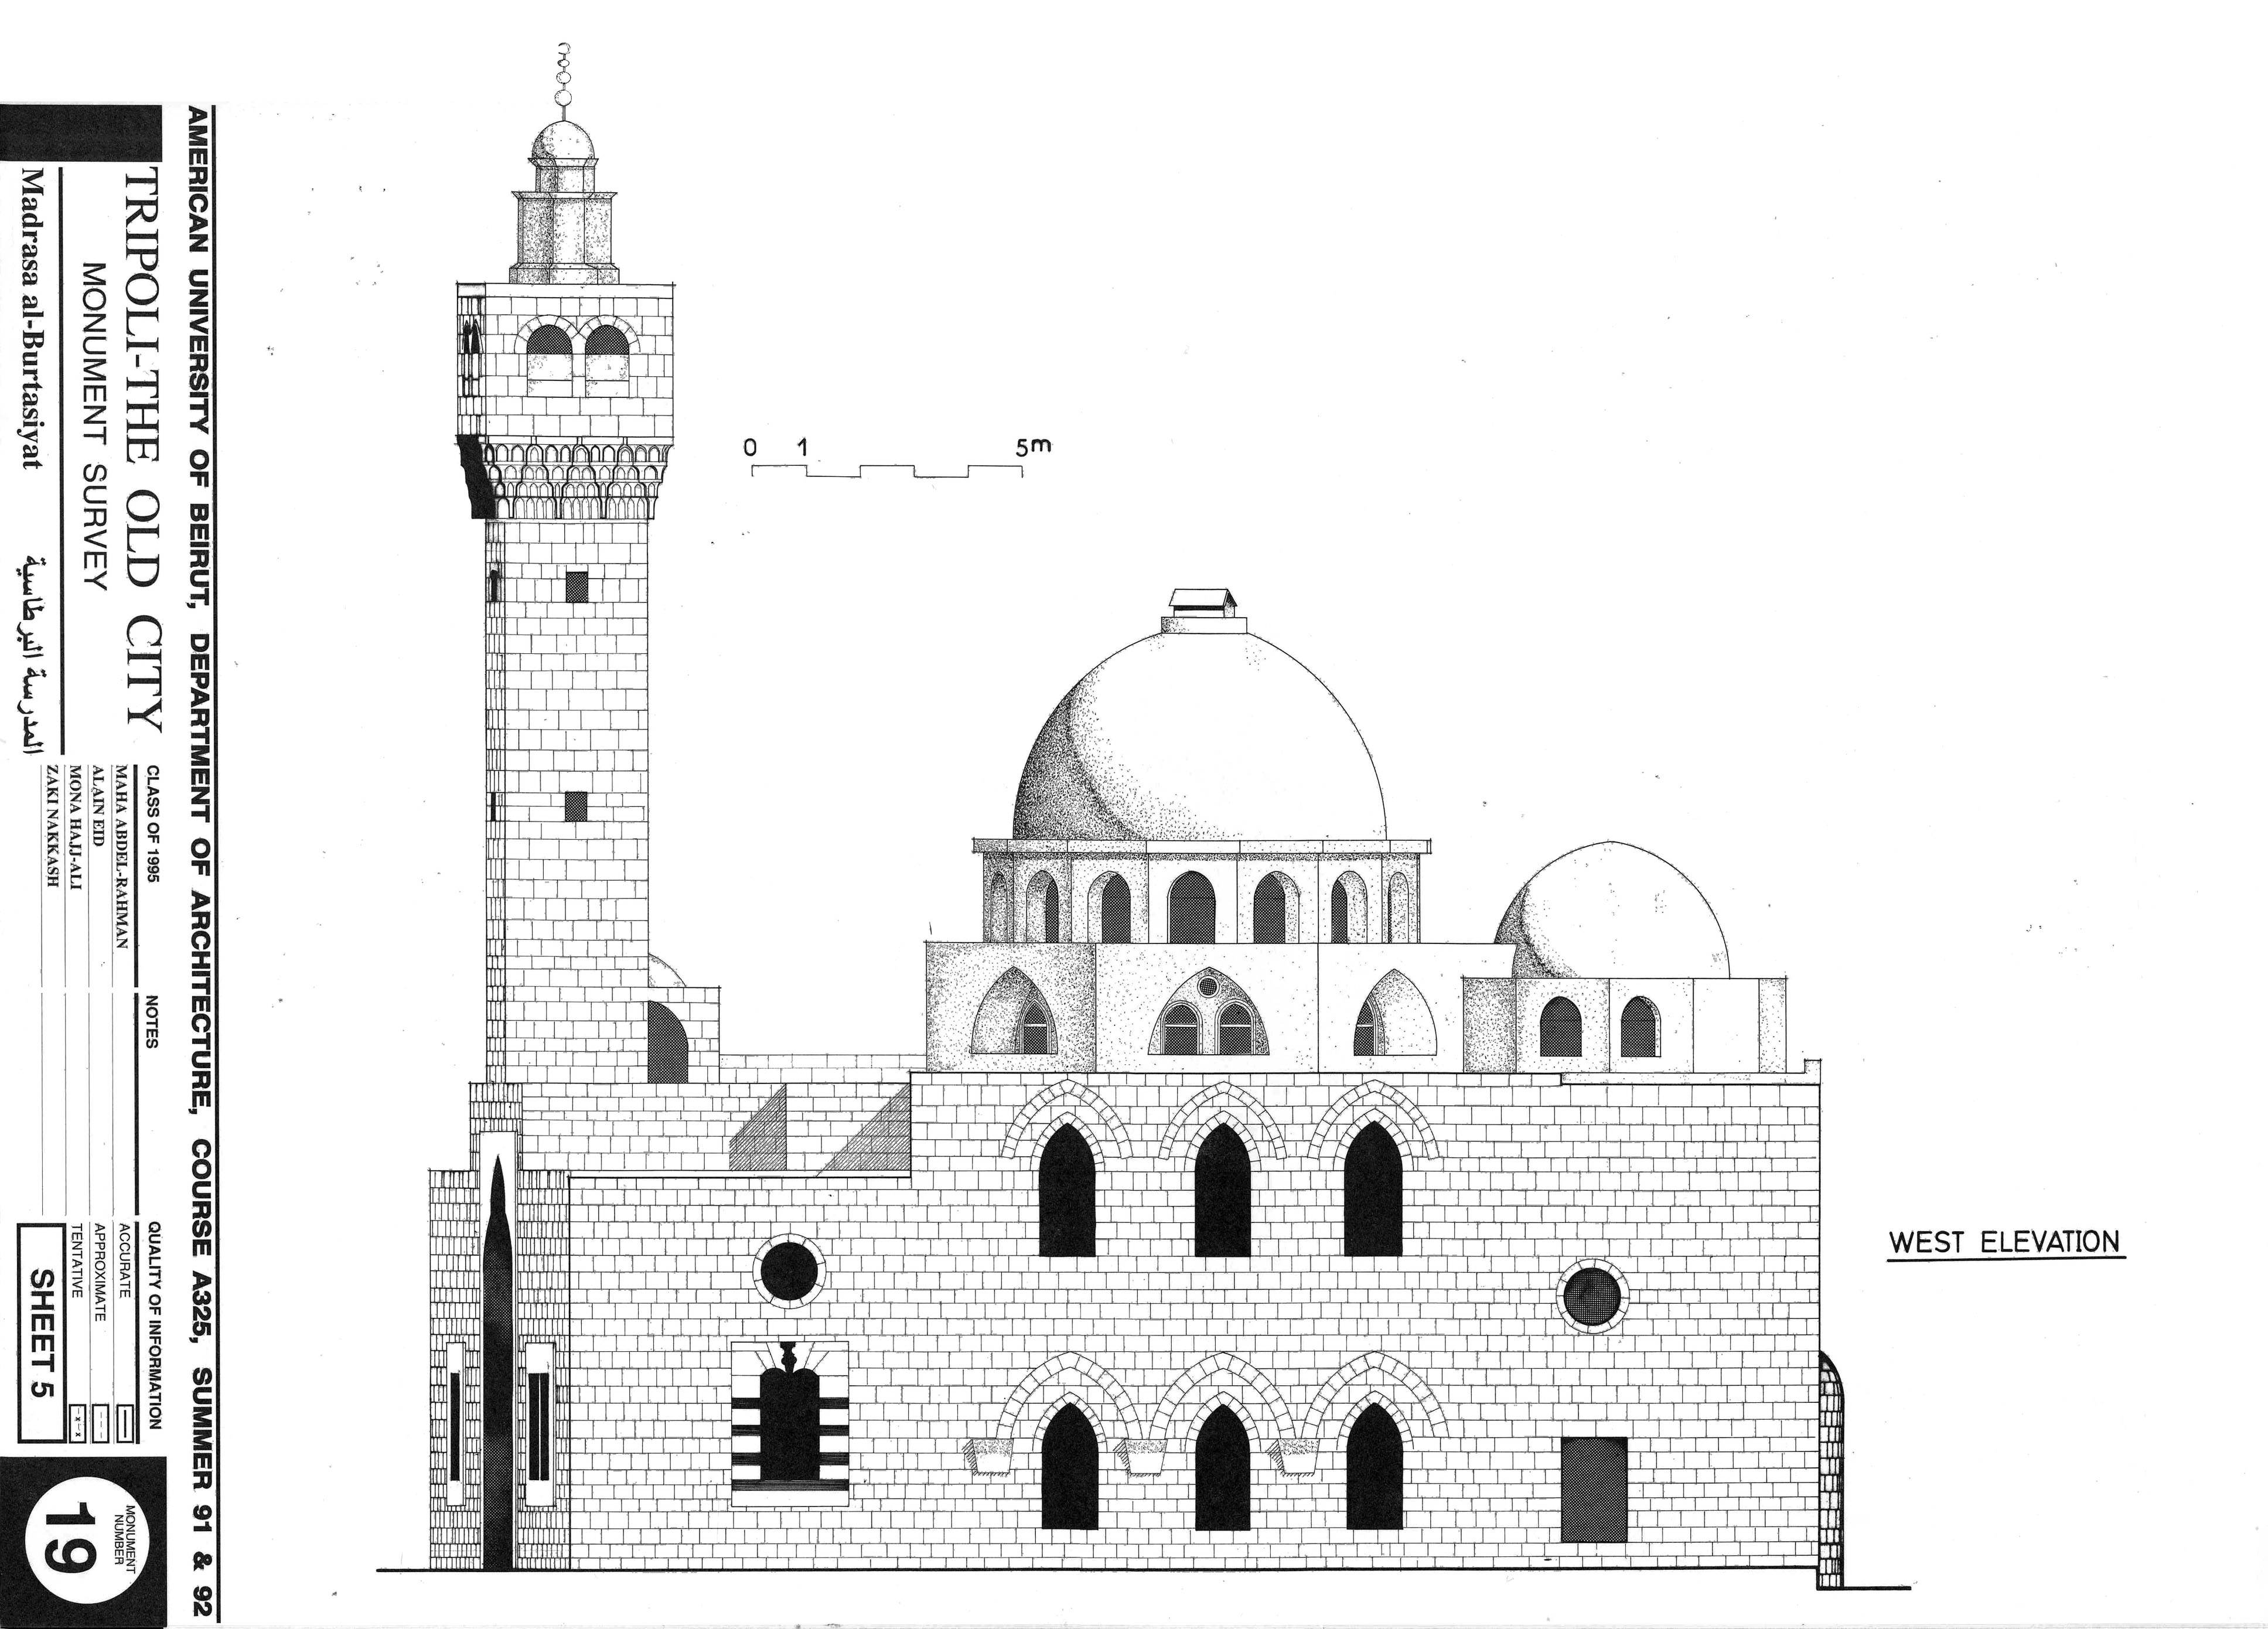 Drawing of the building, based on survey: West elevation.